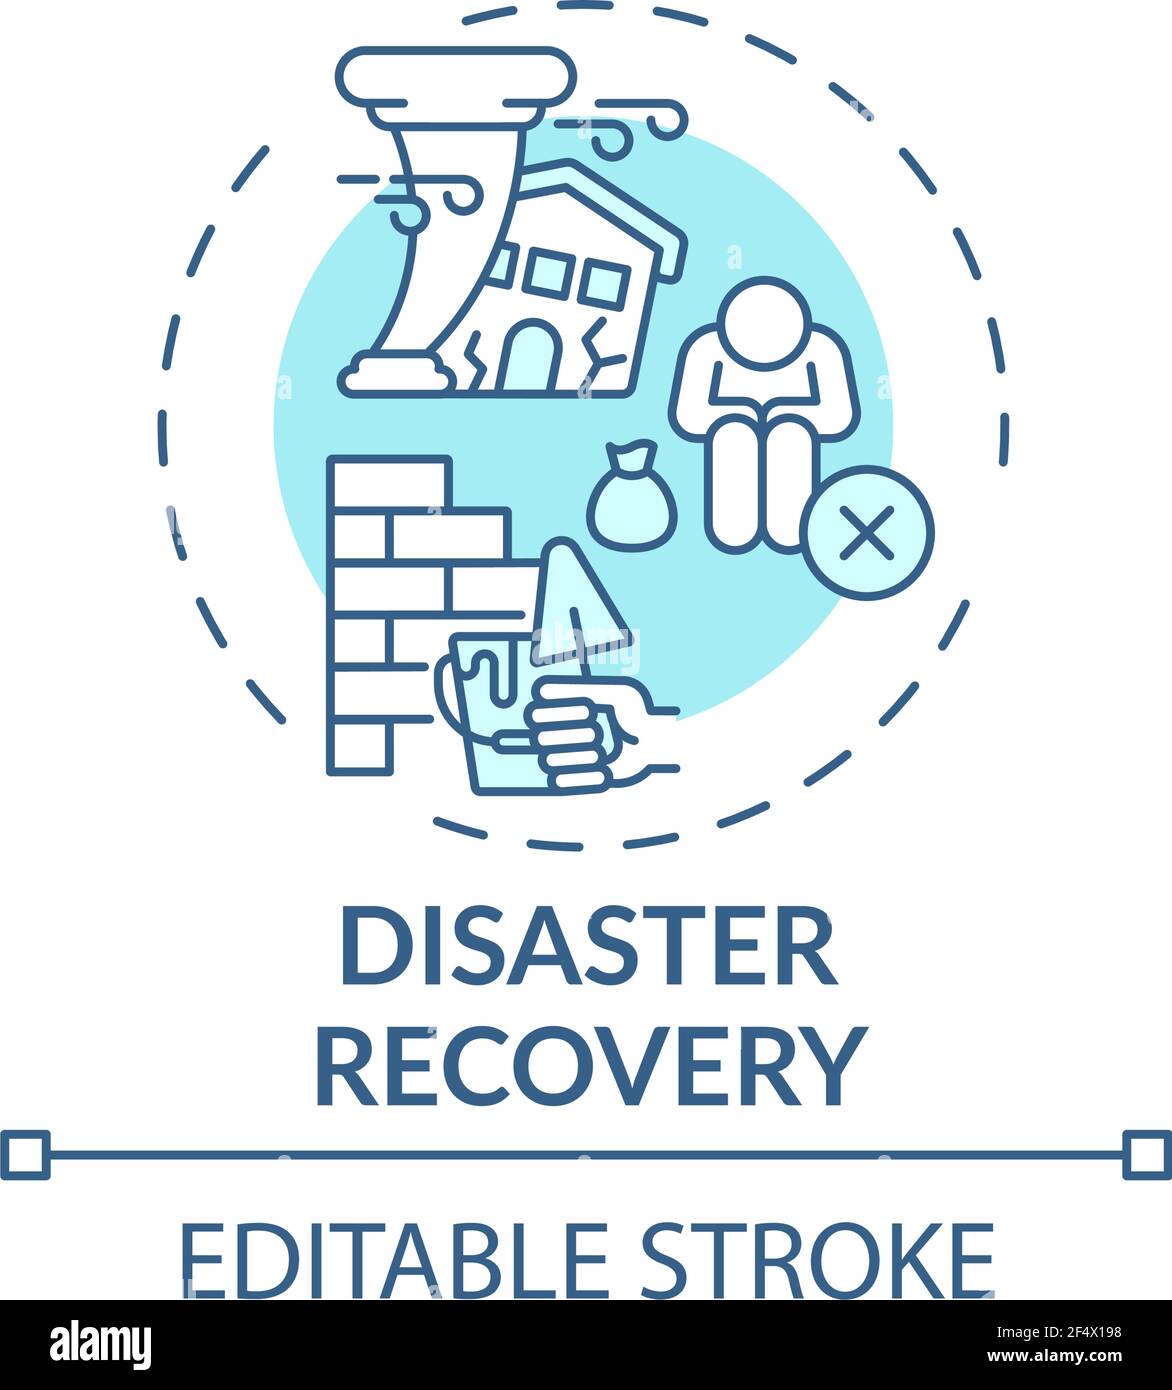 https://c8.alamy.com/comp/2F4X198/disaster-recovery-concept-icon-2F4X198.jpg